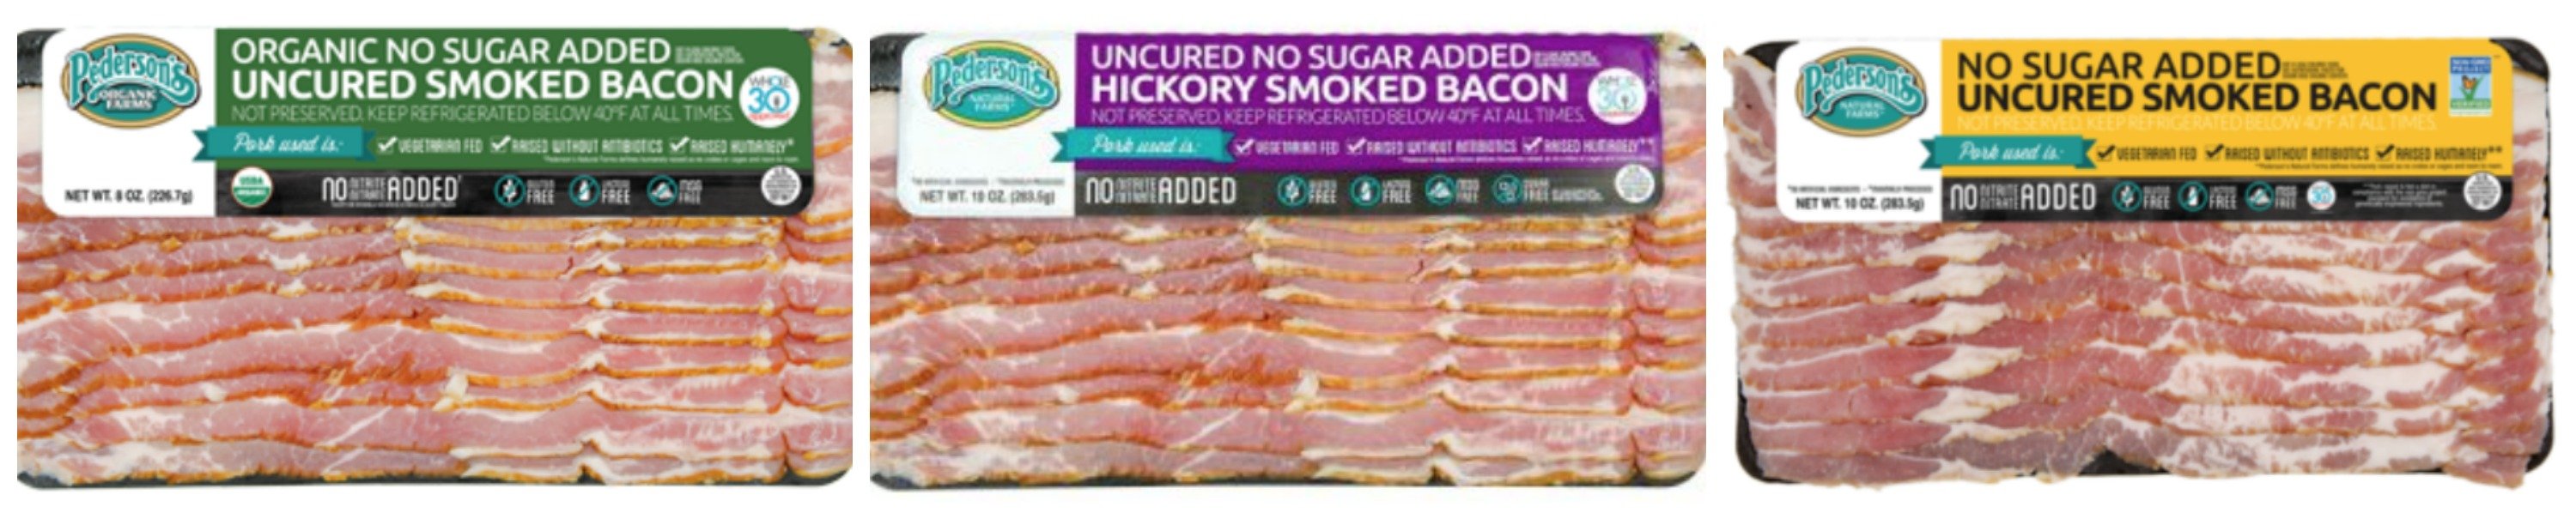 whole30 approved bacon